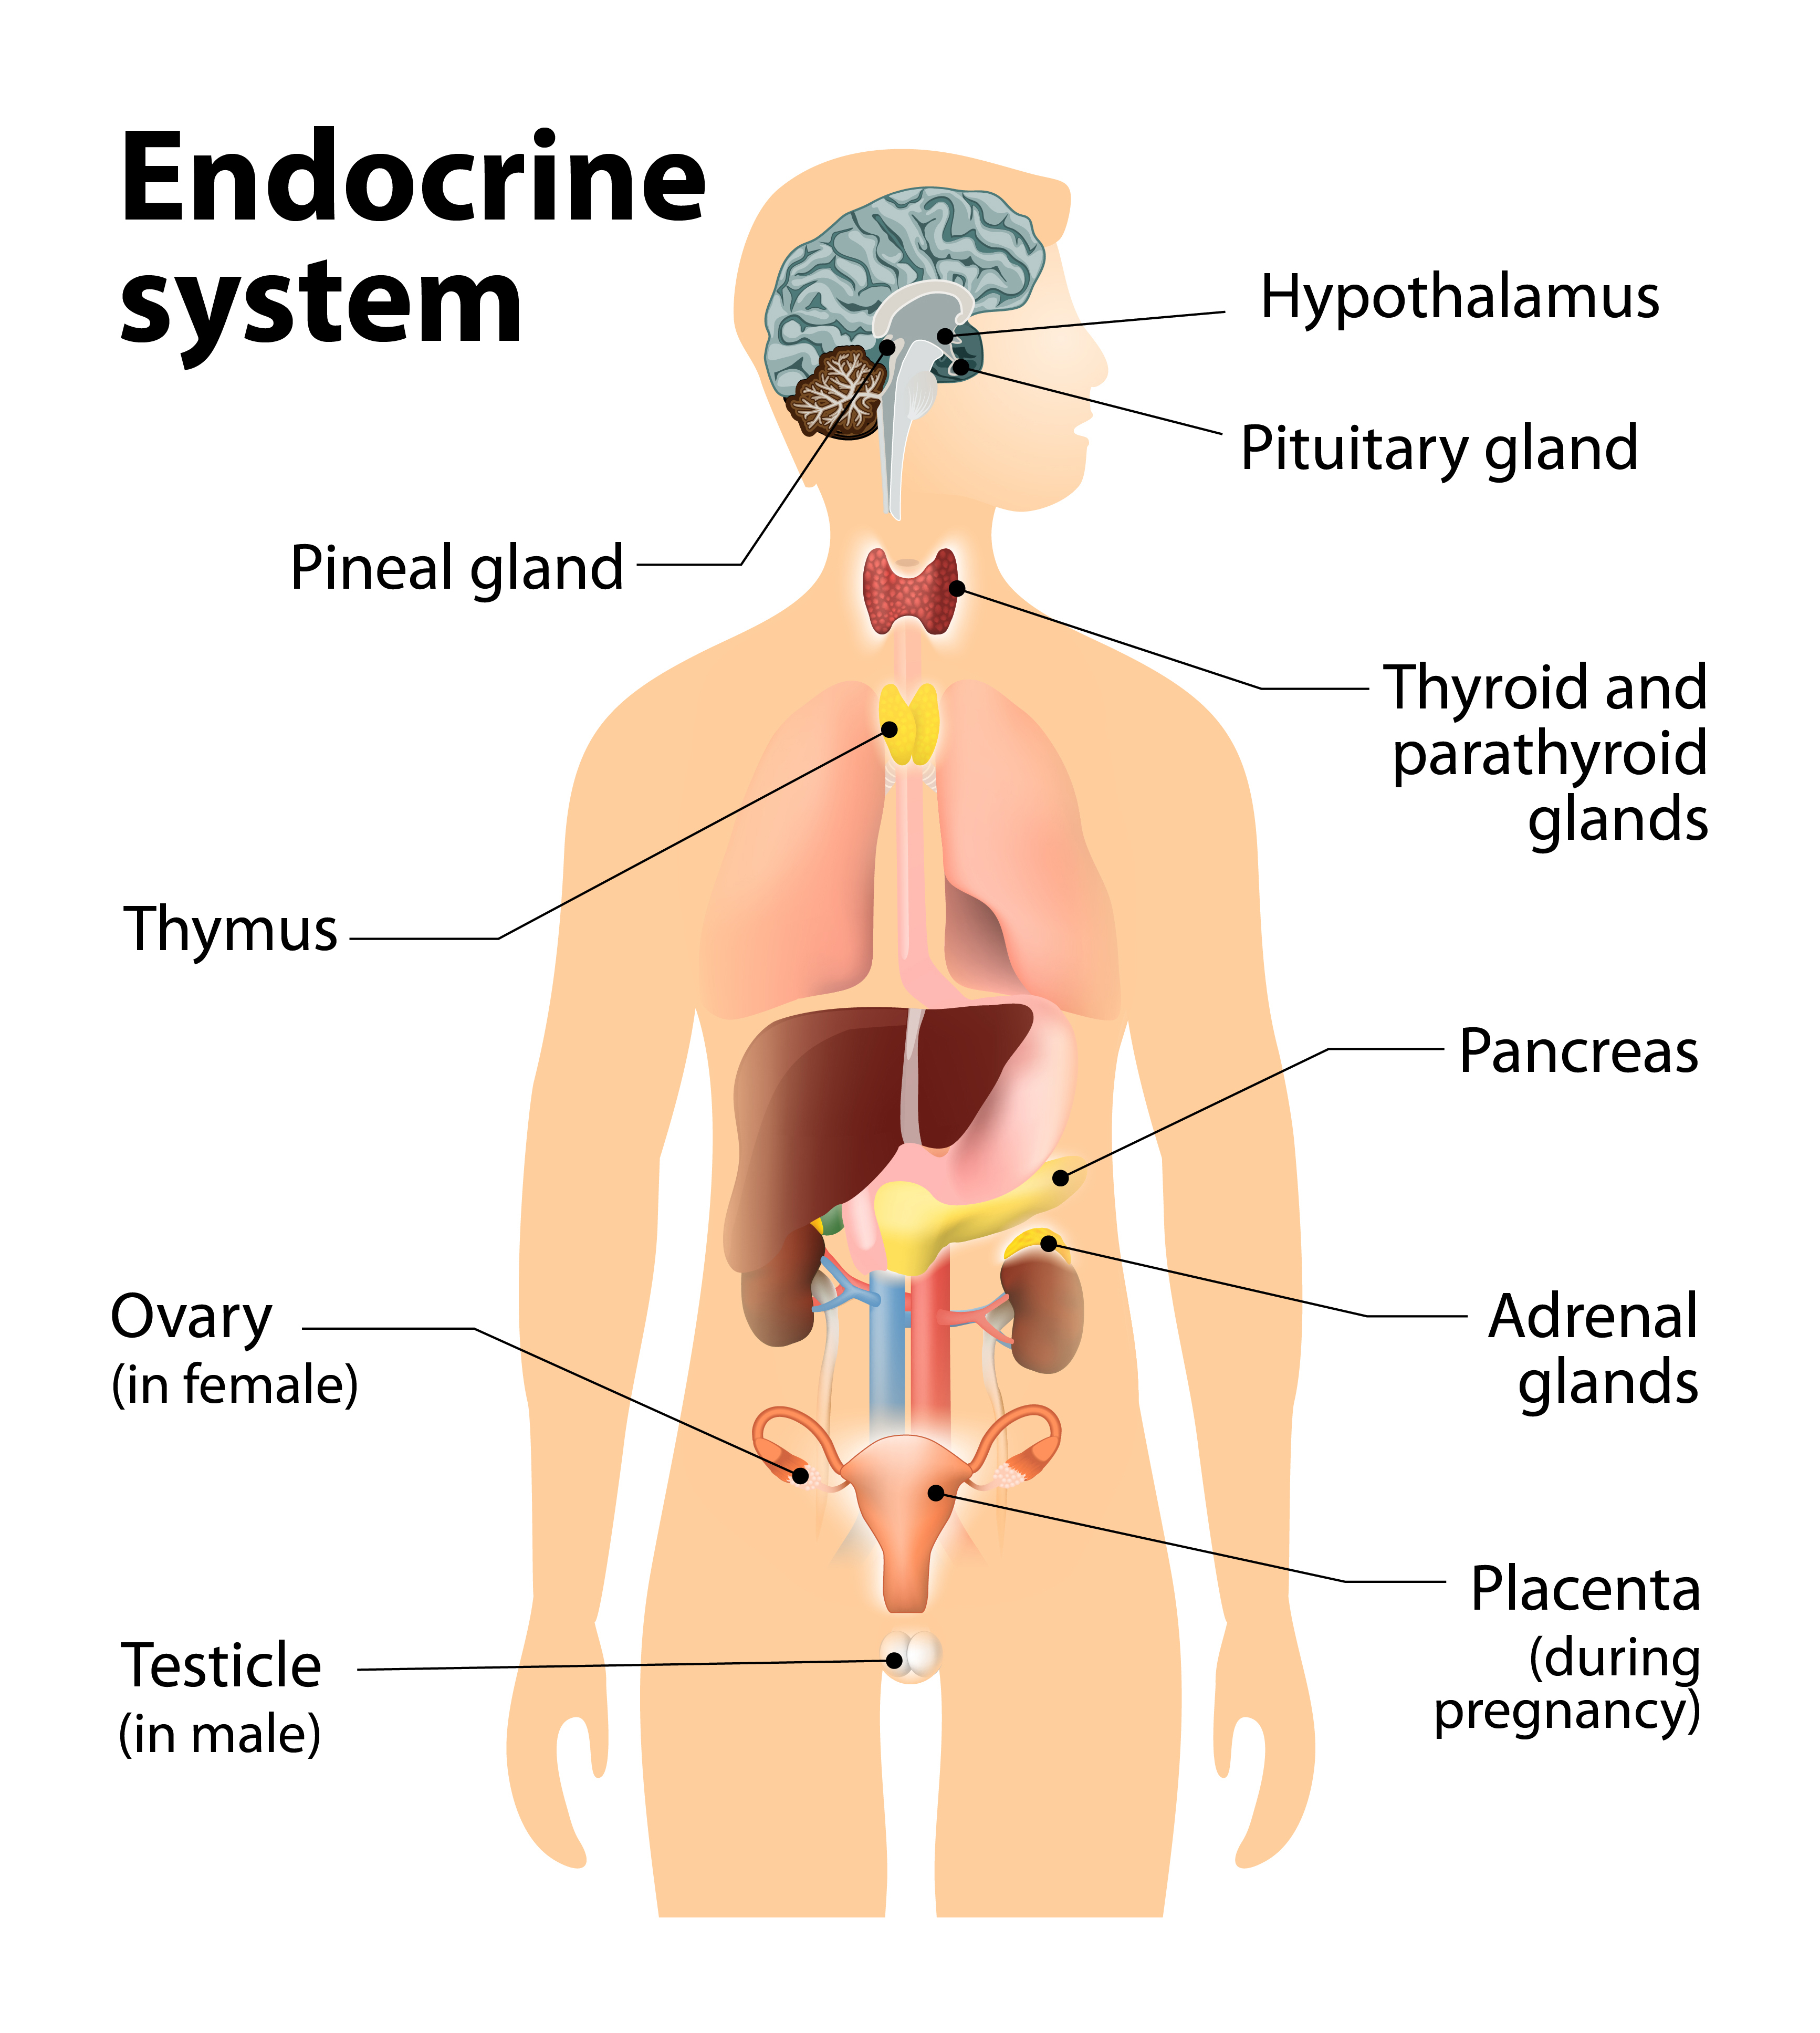 glands in the endocrine system